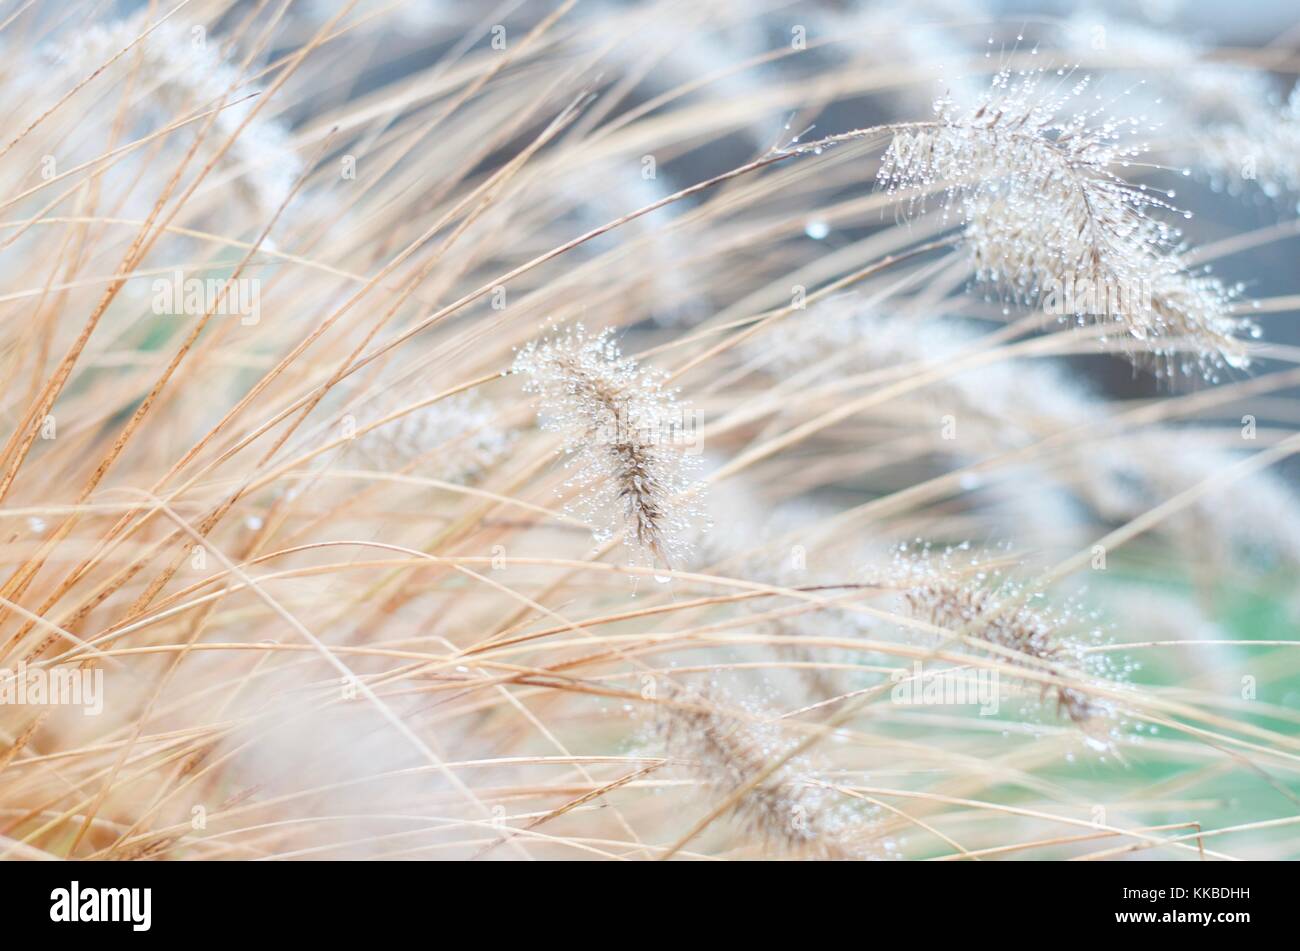 Garden captures of fuzzy tails on cat tails and fancy grasses Stock Photo